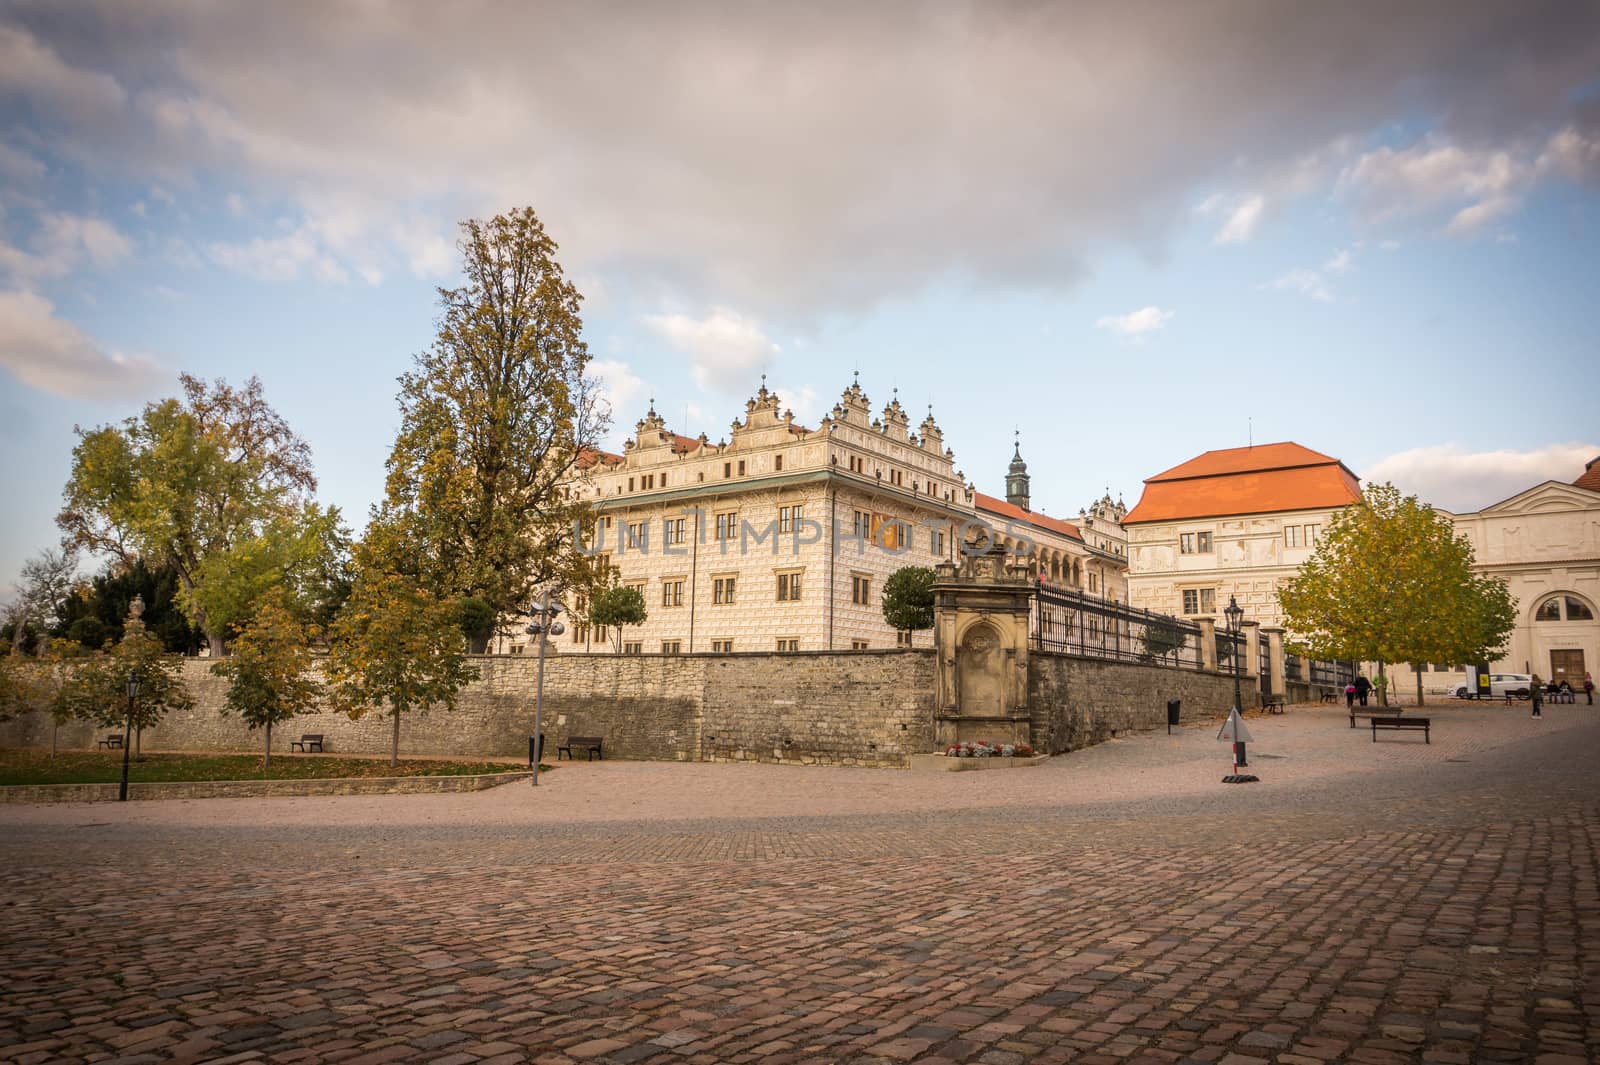 View of Litomysl Castle, one of the largest Renaissance castles in the Czech Republic. UNESCO World Heritage Site. Sunny wethe wit few clouds in the sky and square. by petrsvoboda91